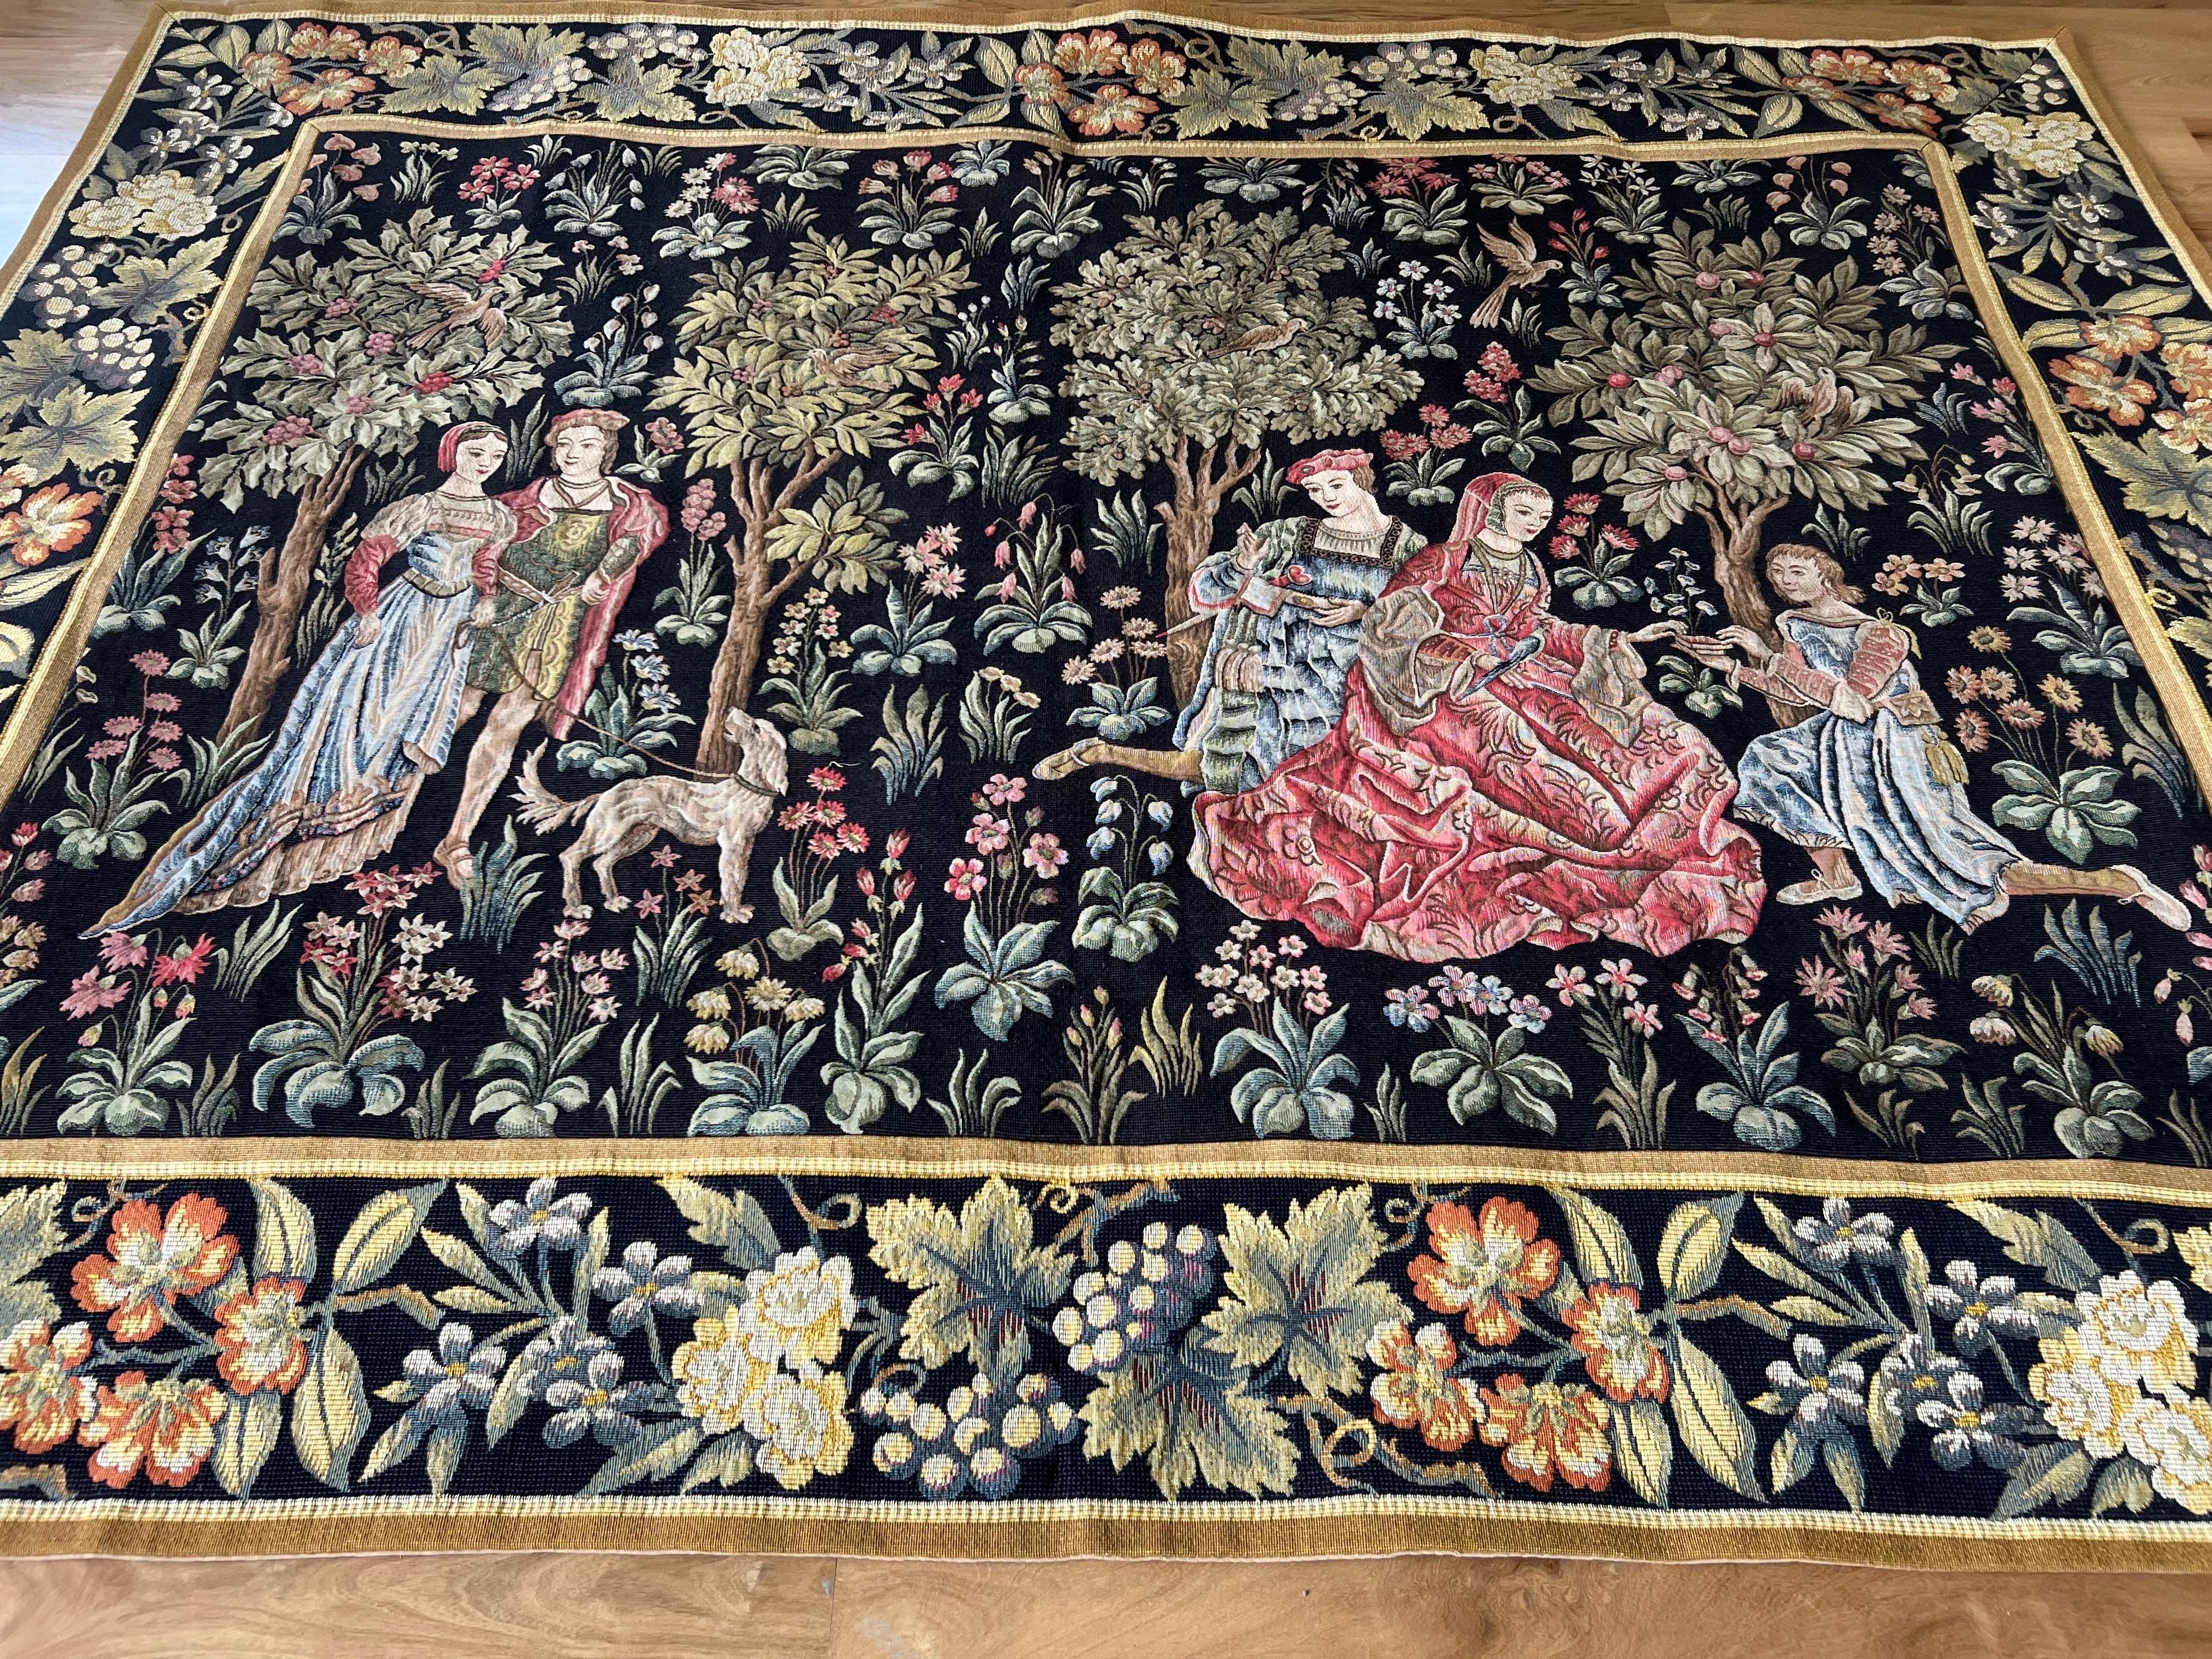 20th Century French Wool Tapestry Attributed to the Aubusson Manufacture For Sale 3